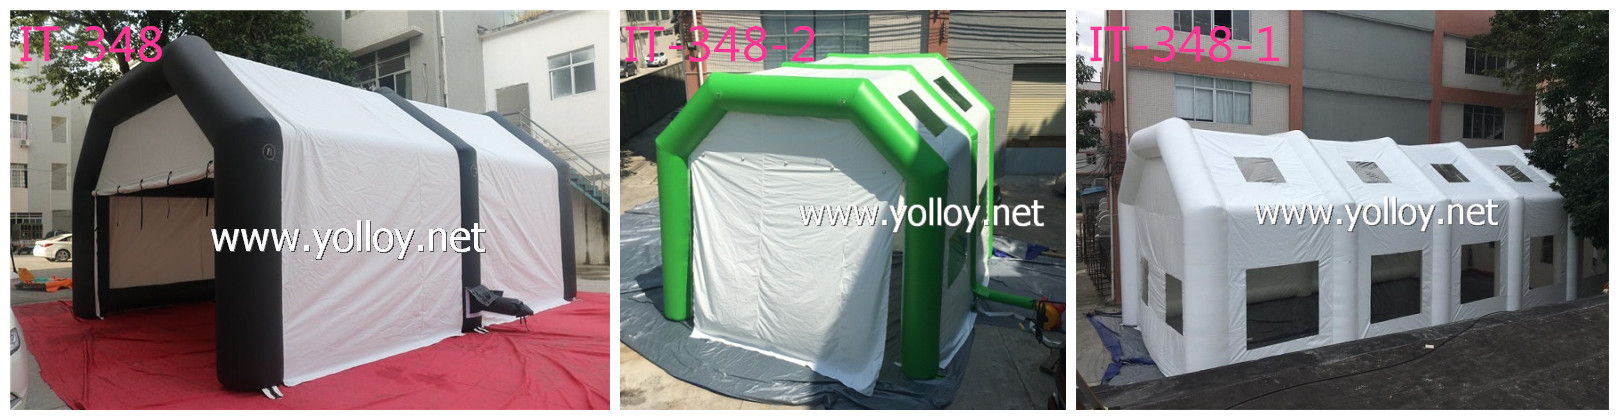 inflatable paintbooth